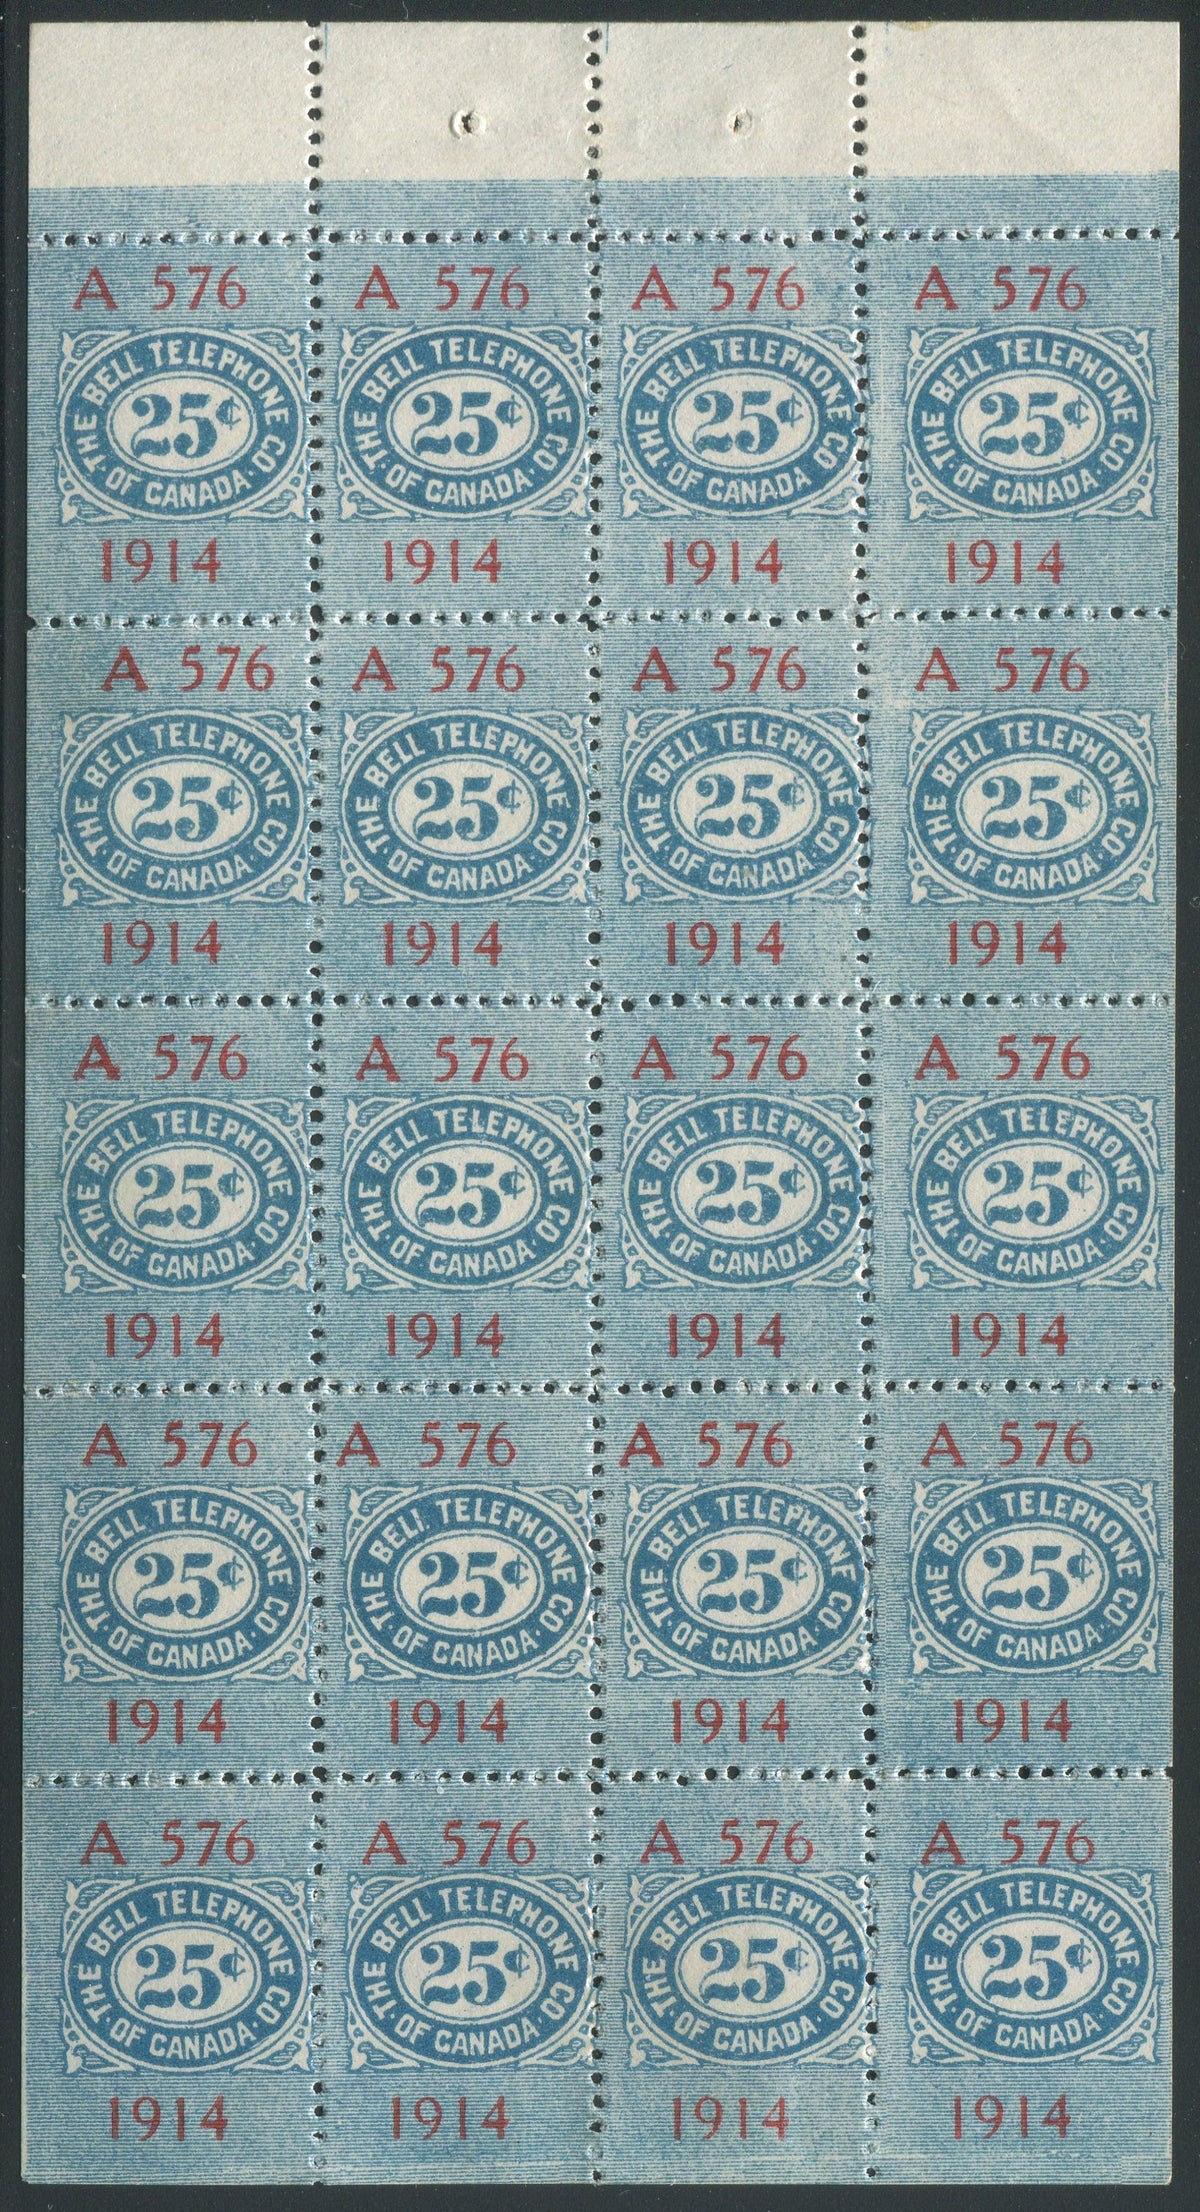 0176BT1907 - TBT62 - Mint Booklet Pane, Watermarked - Unlisted Error